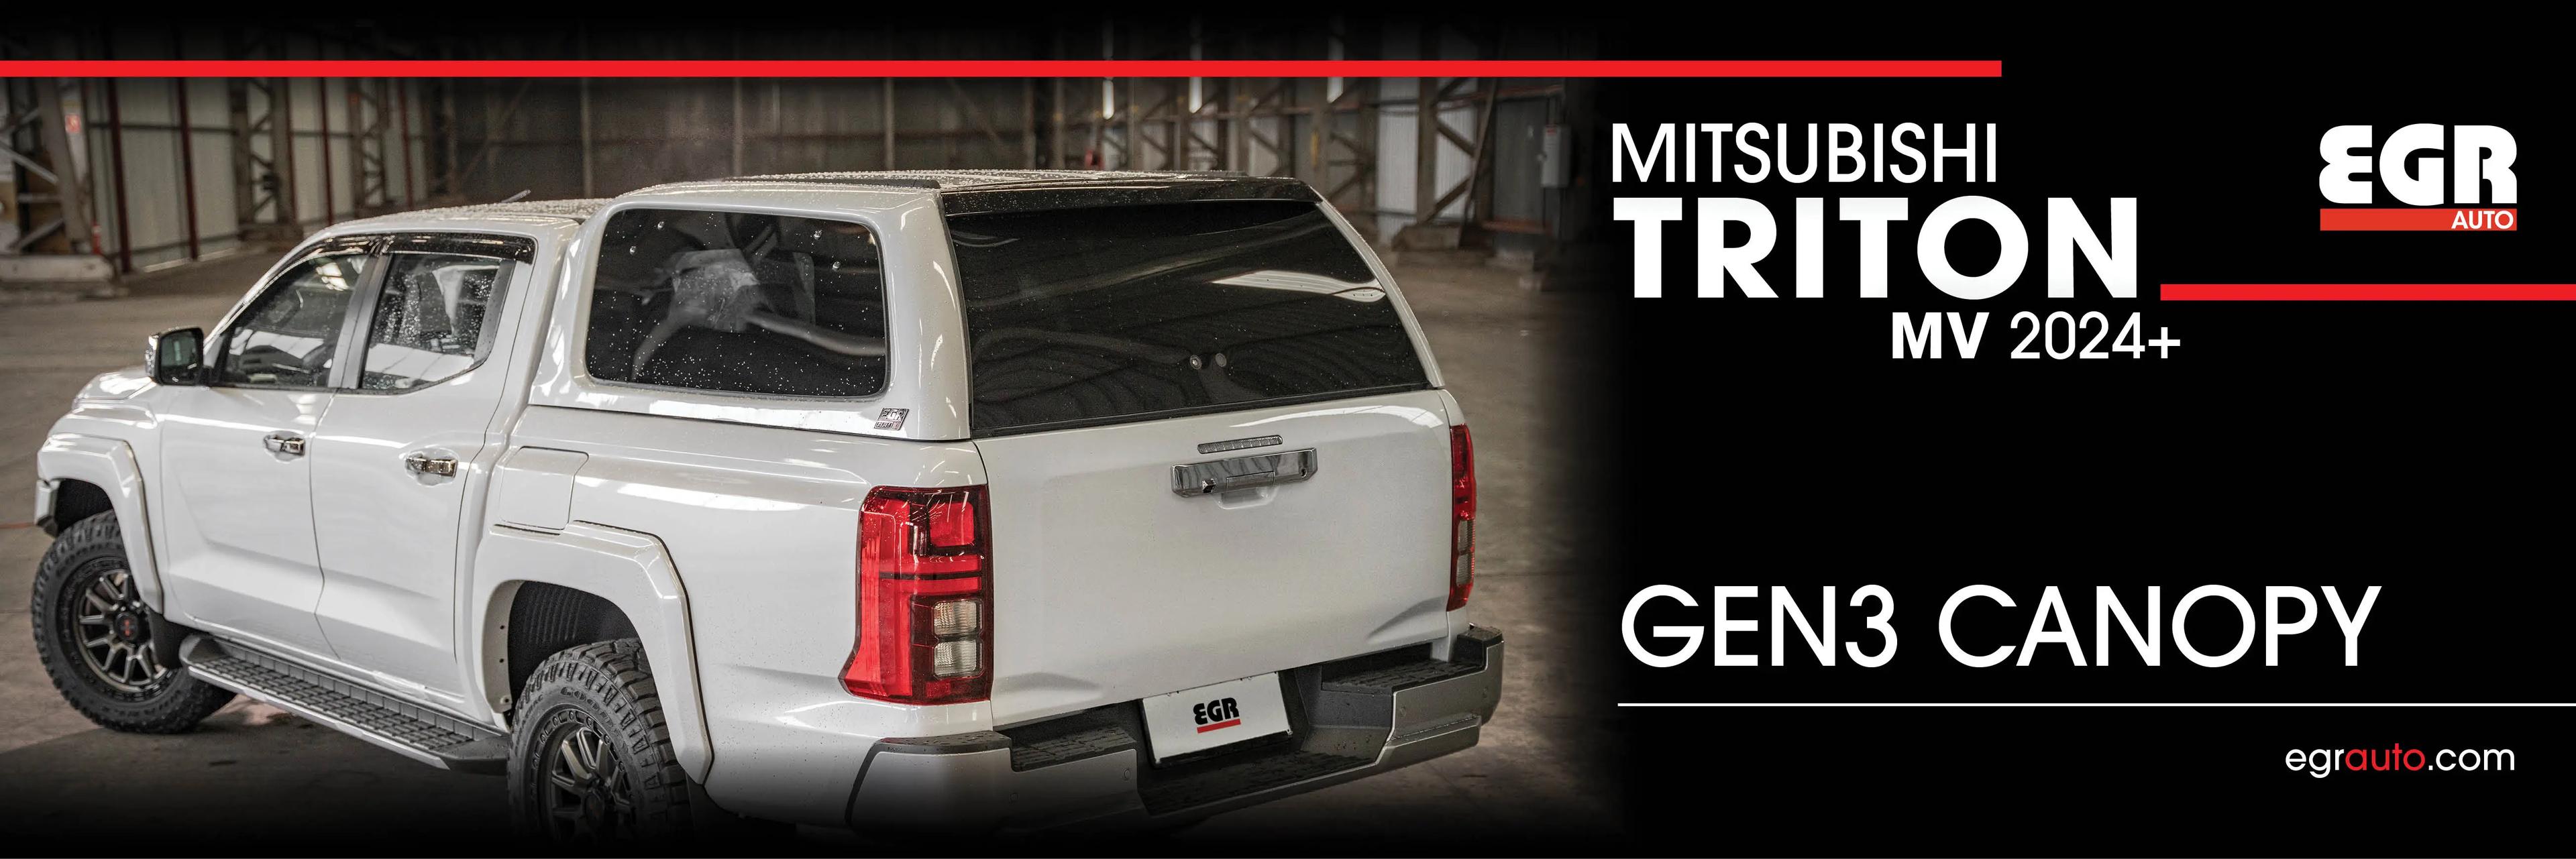 Promo banner - Click here for new EGR GEN3 Canopies available now for the Mitsubishi Triton MV 2024.